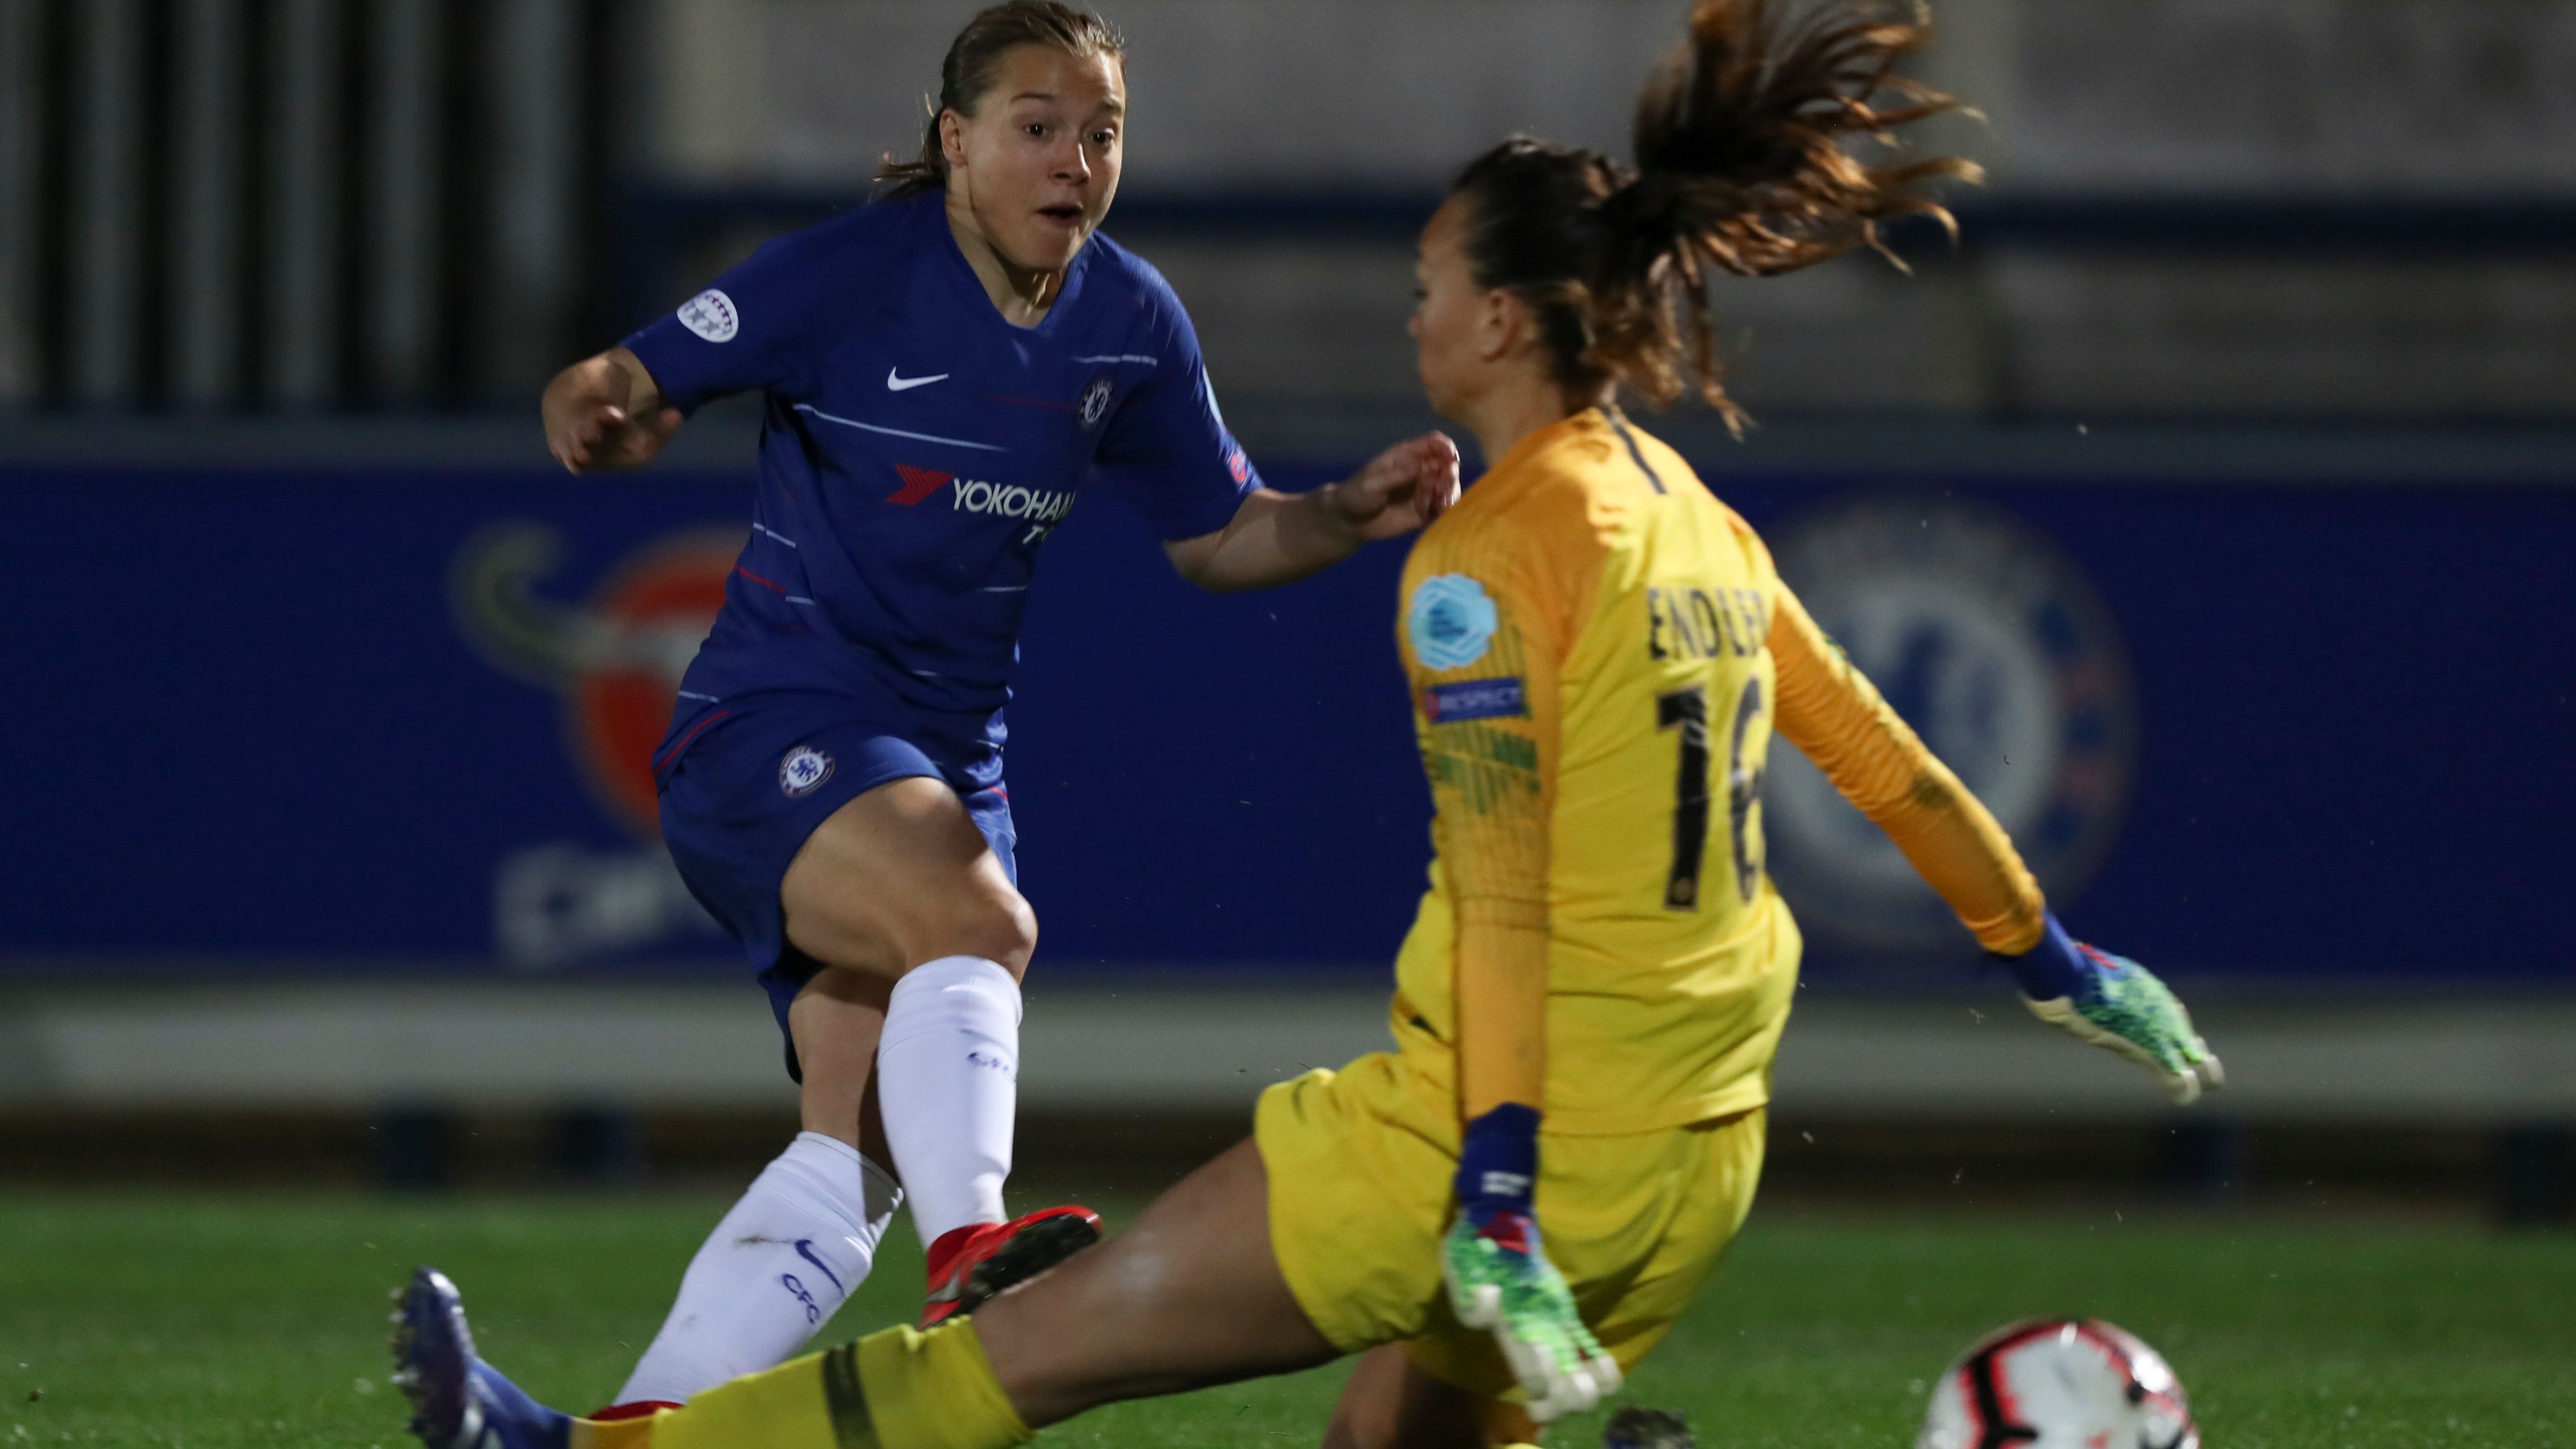 Image result for chelsea 2-0 psg women's champions league 2019 getty